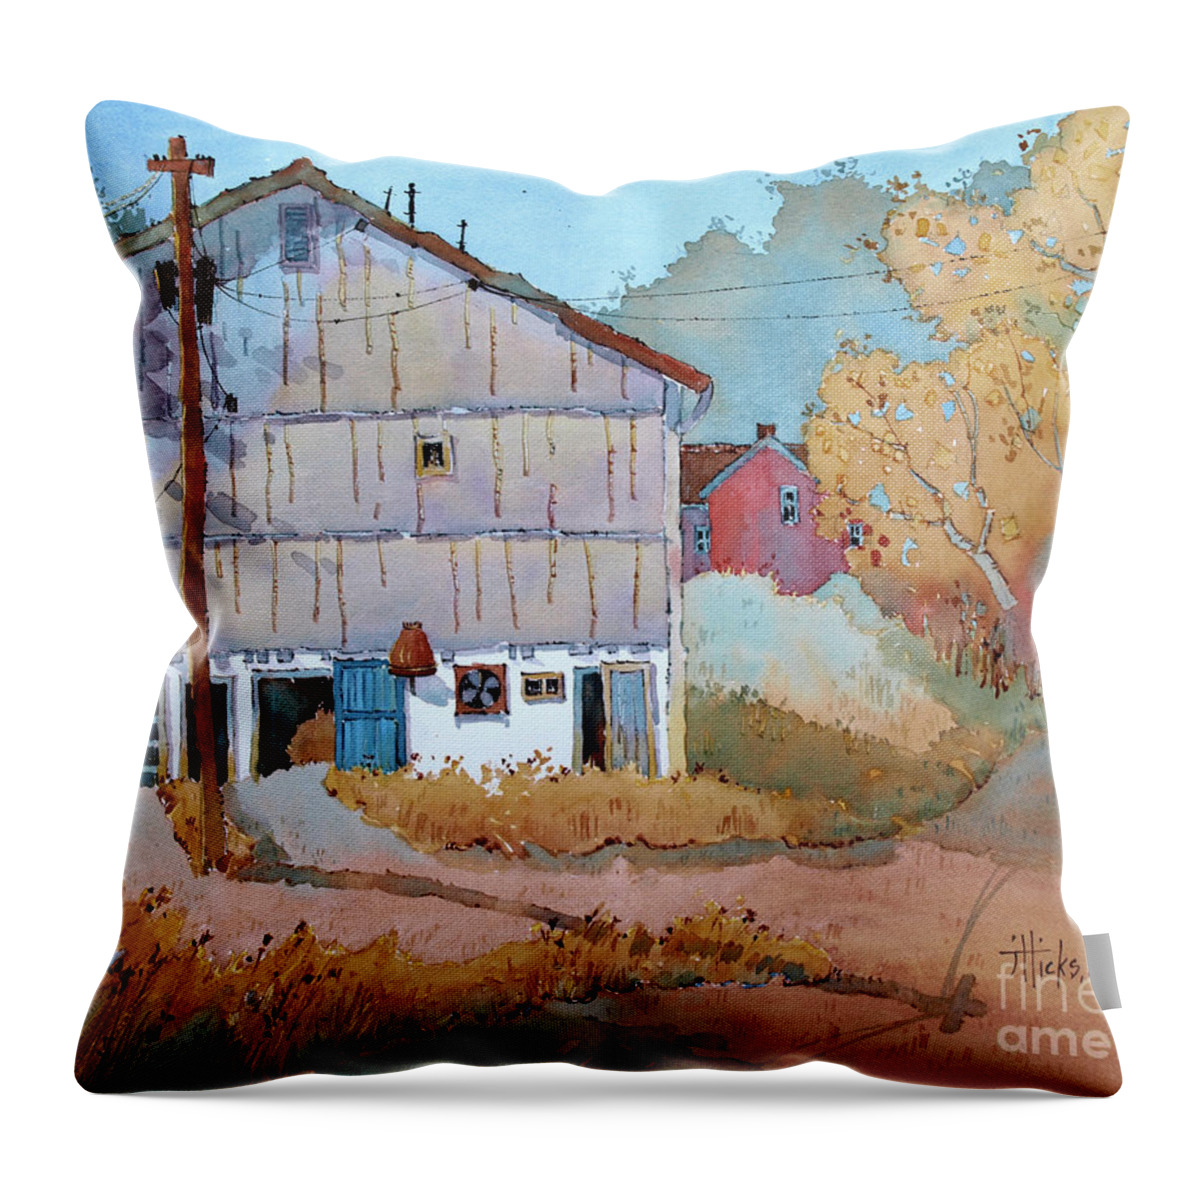 Barn Throw Pillow featuring the painting Barn Door Whimsy by Joyce Hicks